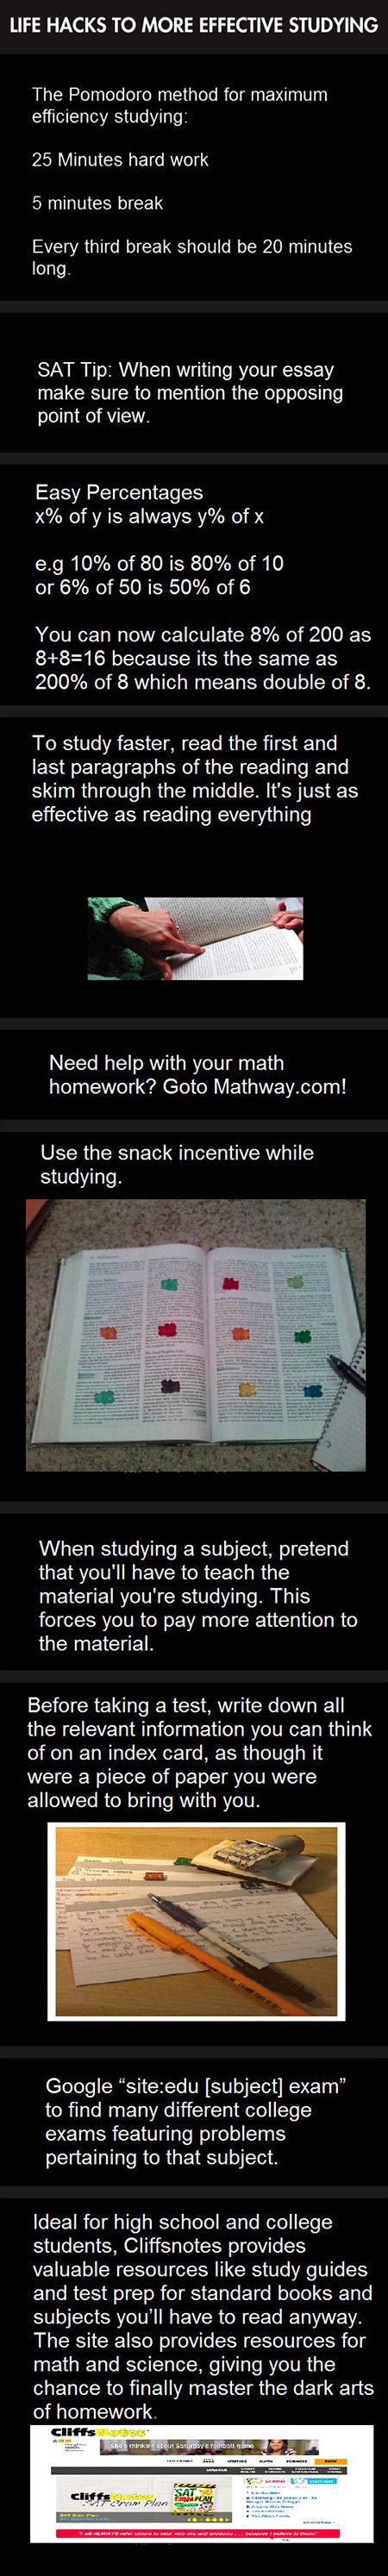 10 Cool and Useful Life Hacks for Students